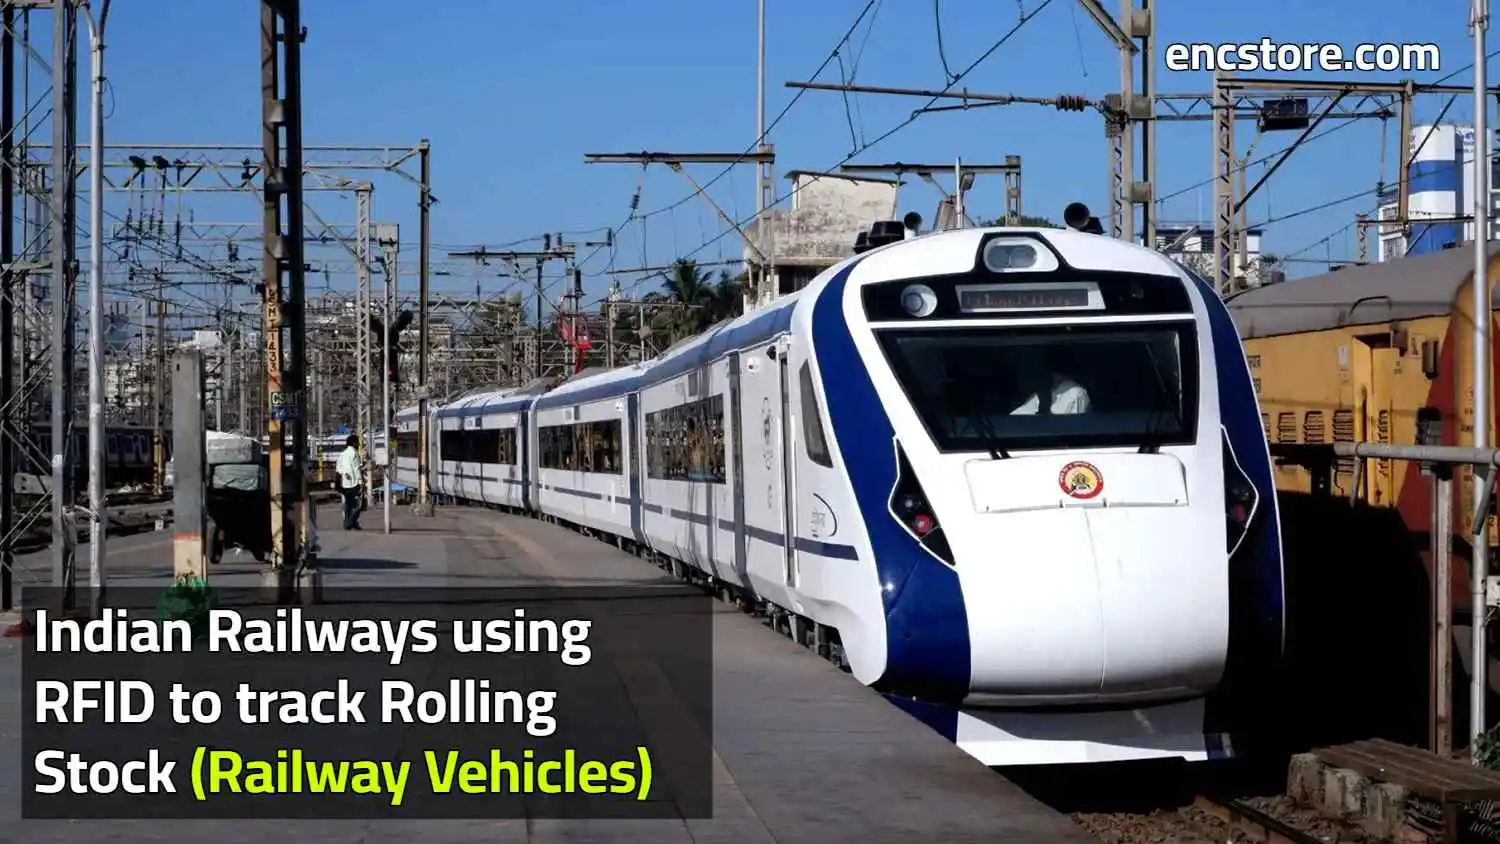 RFID to track Rolling Stock (Railway Vehicles)